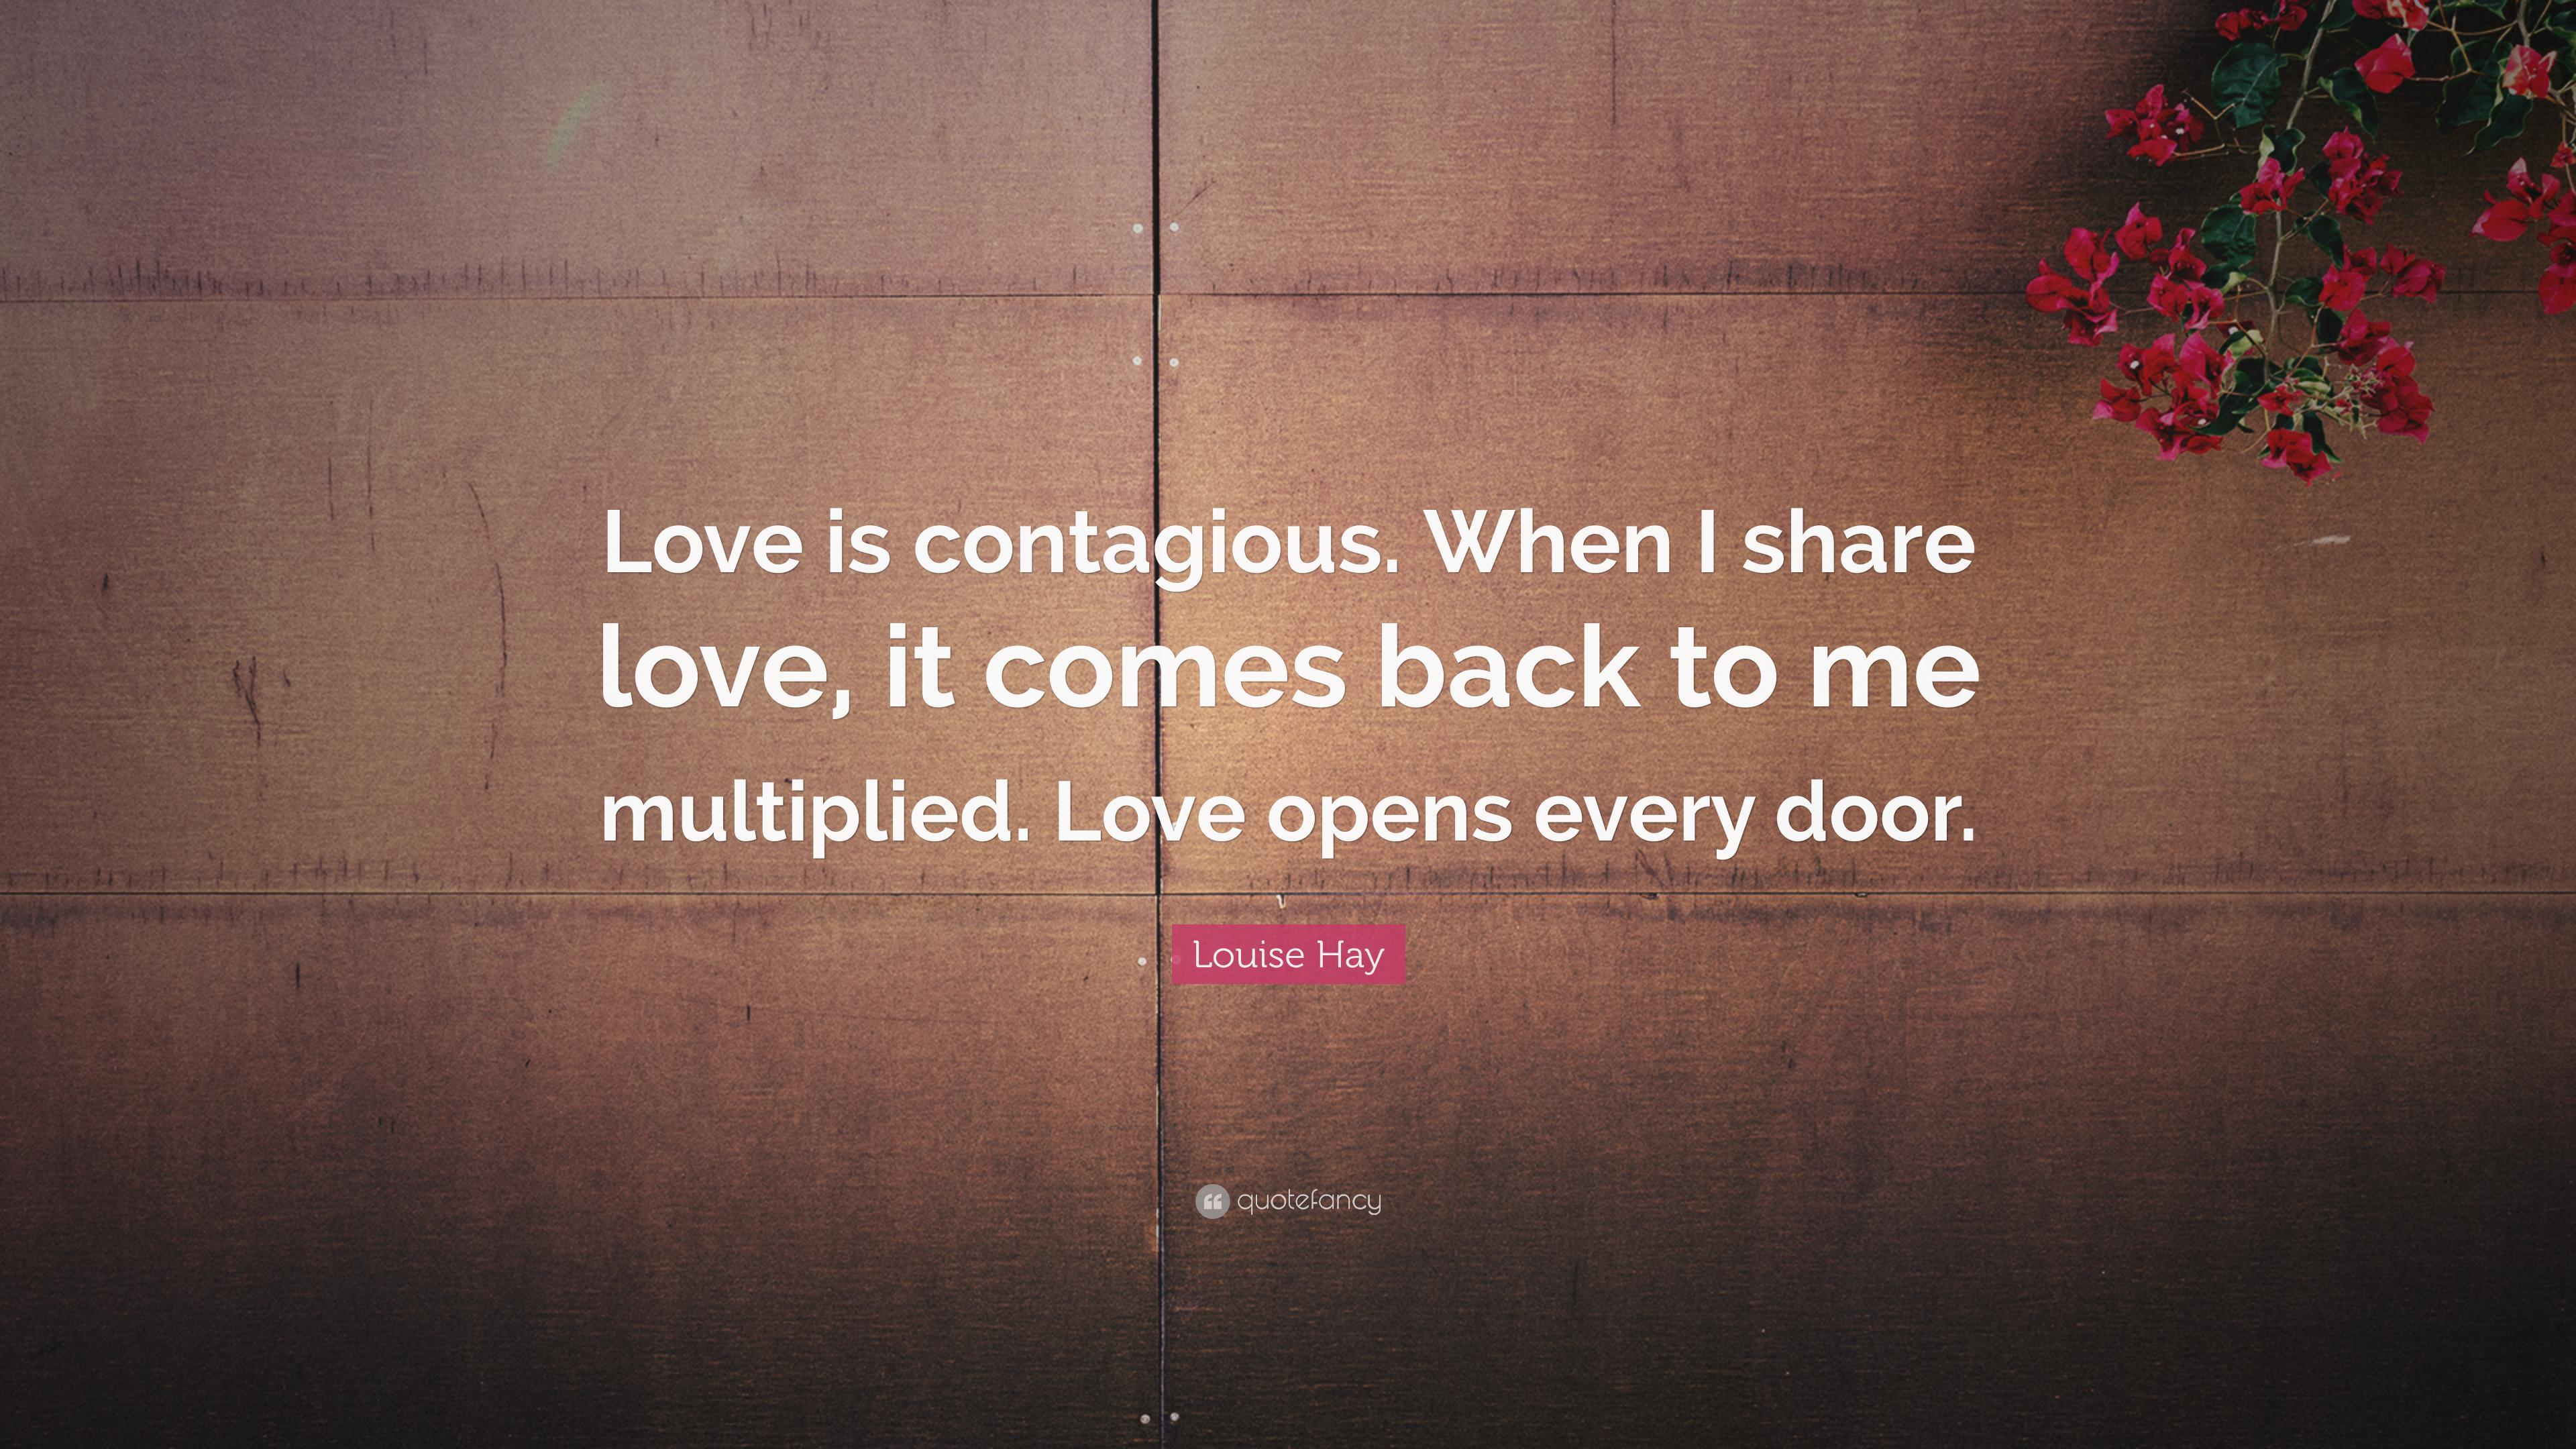 Louise Hay Quote: “Love is contagious. When I share love, it